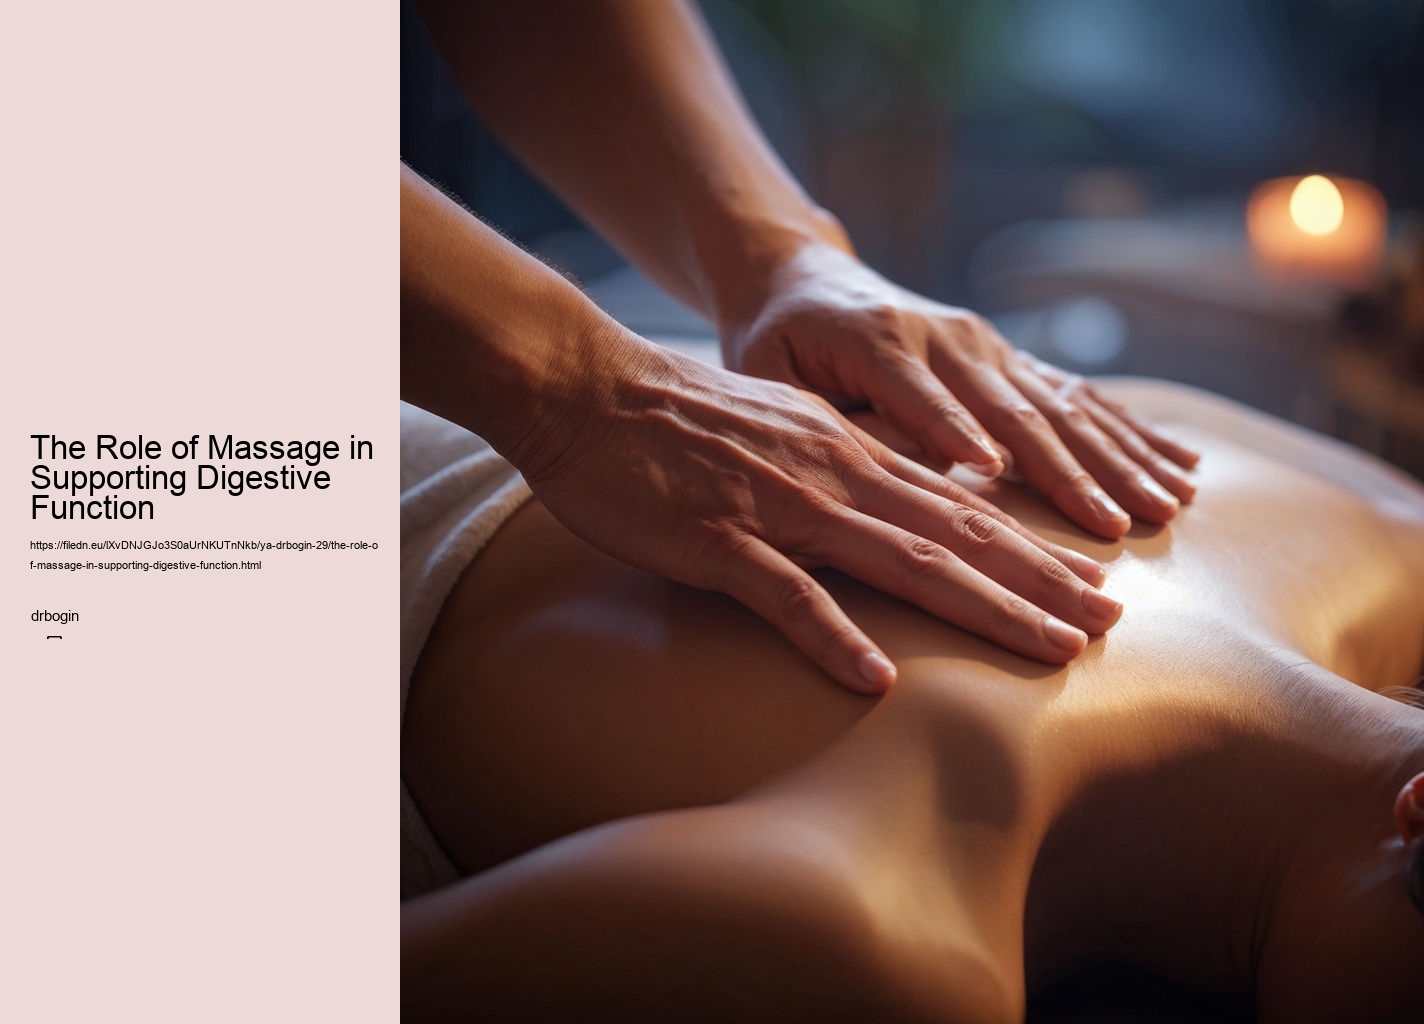 The Role of Massage in Supporting Digestive Function